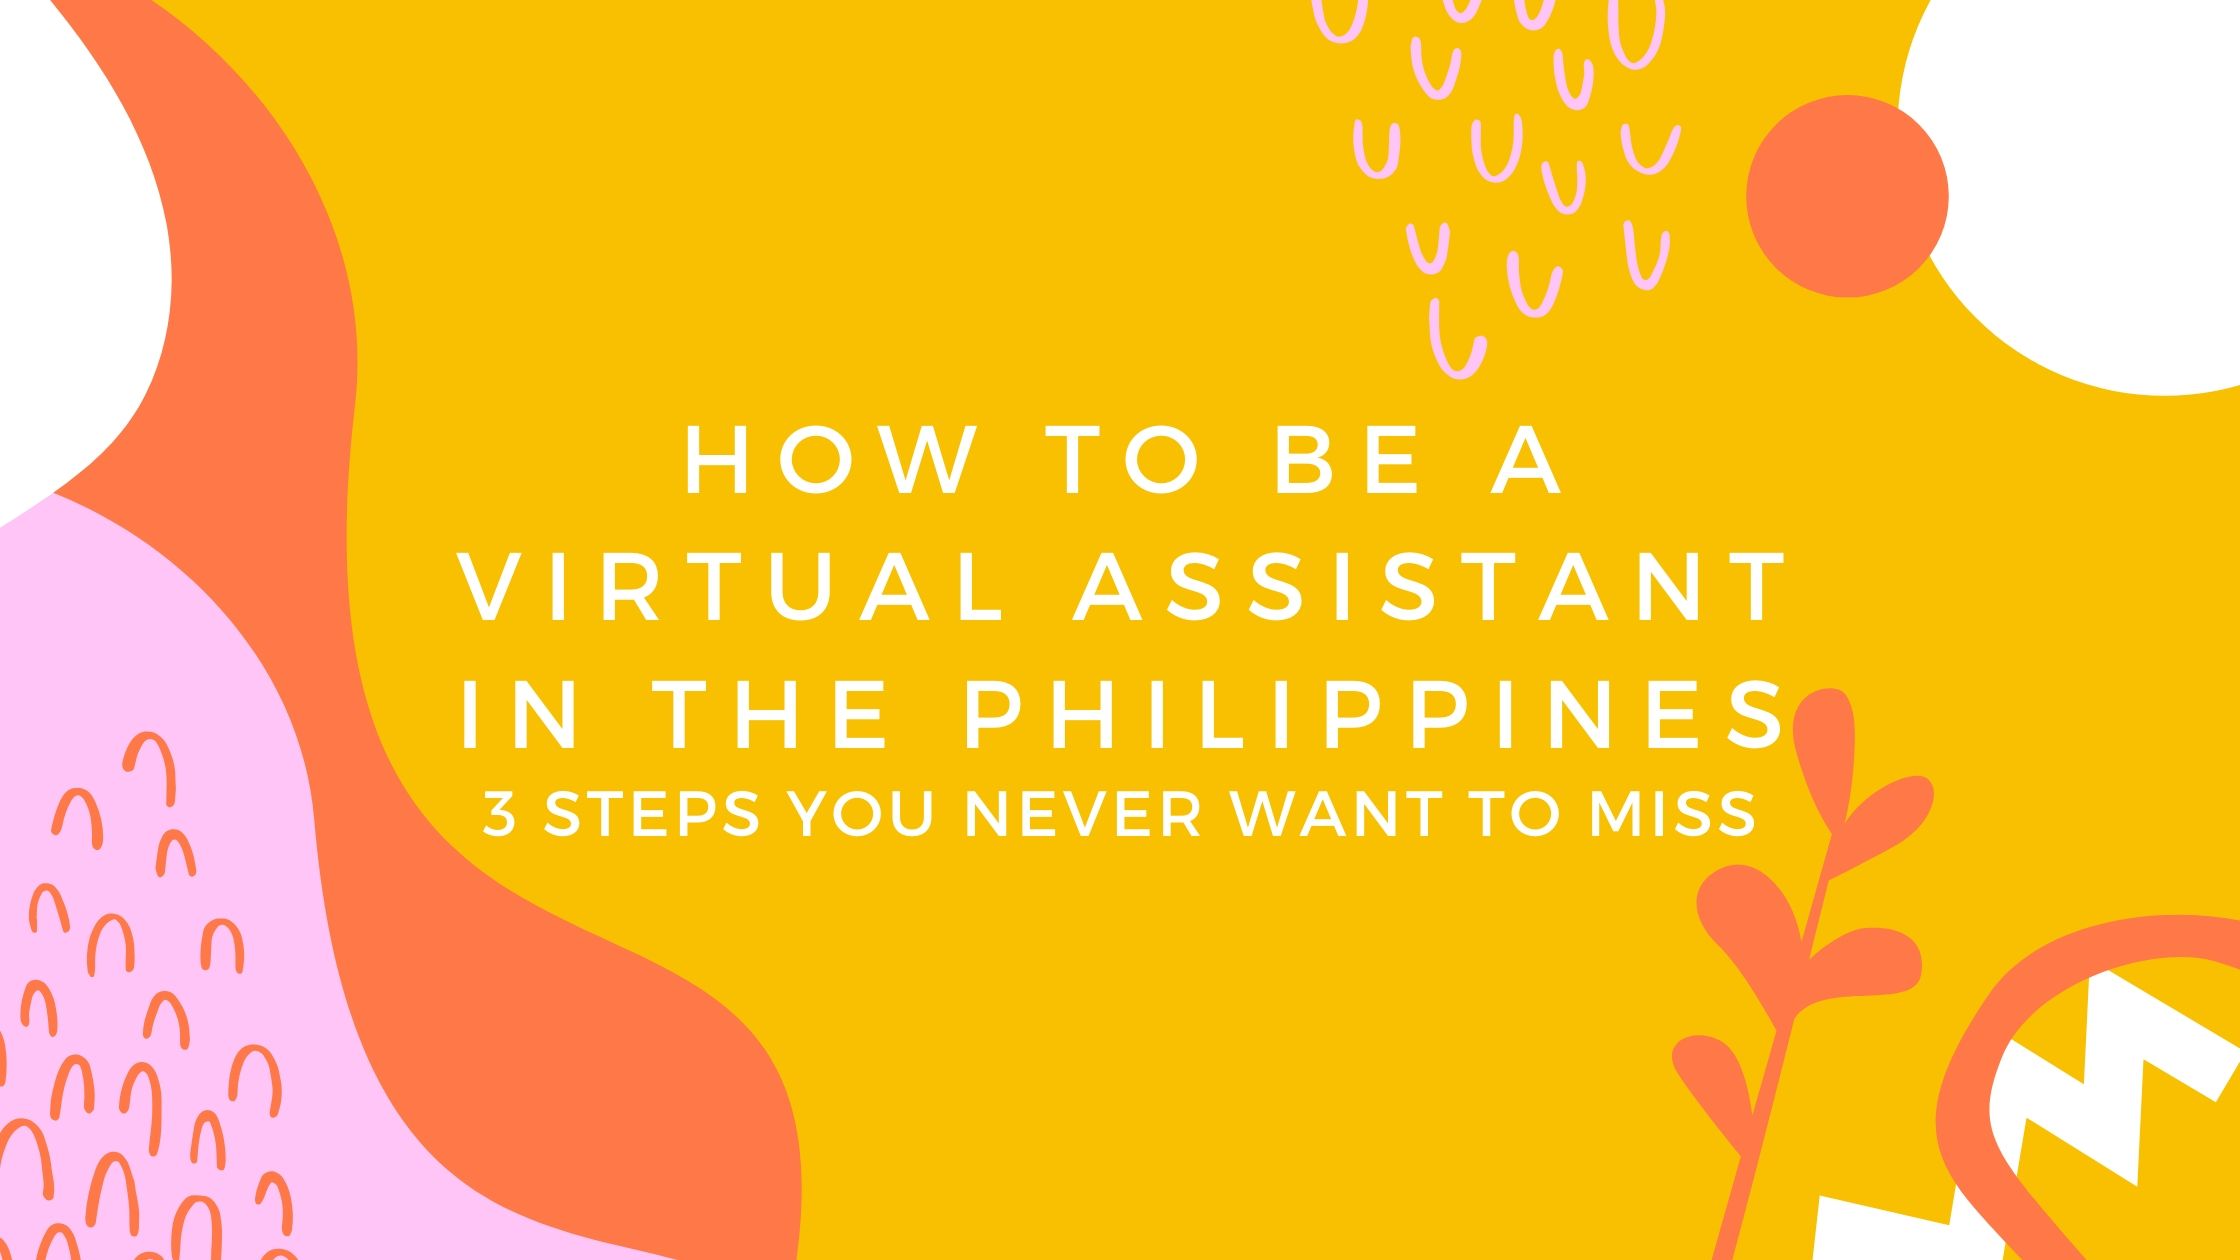 How to Be a Virtual Assistant in the Philippines